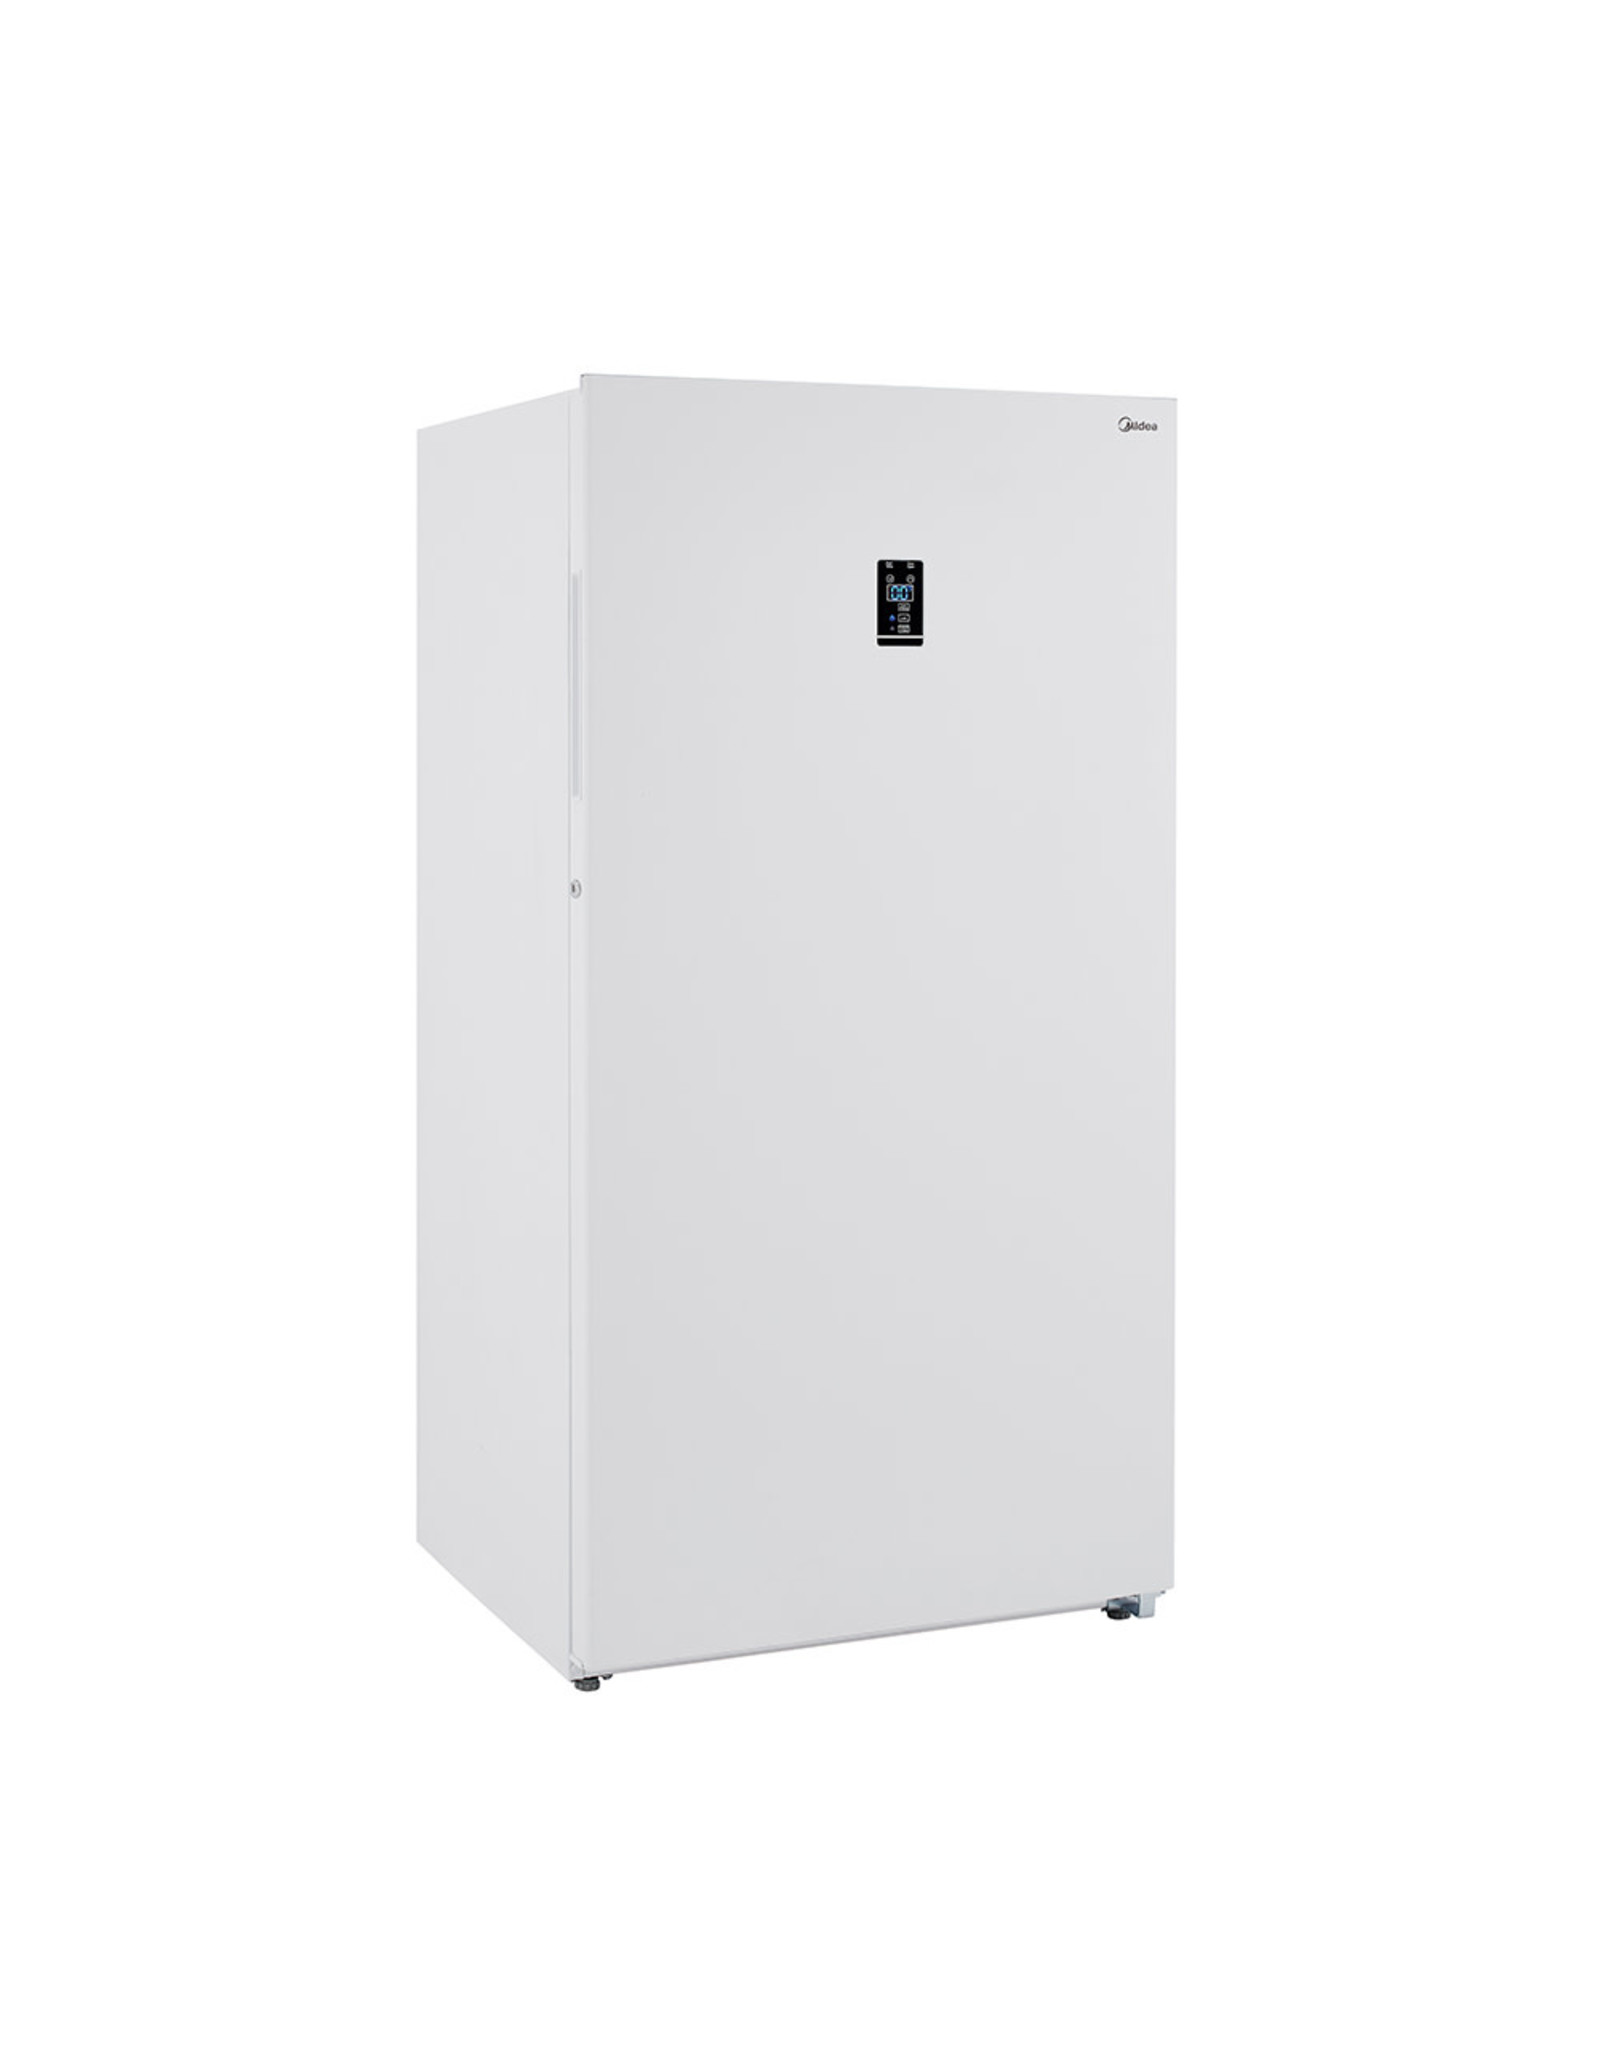 Midea  17-cu ft Frost-free Convertible Upright Freezer/Refrigerator (White) ENERGY STAR